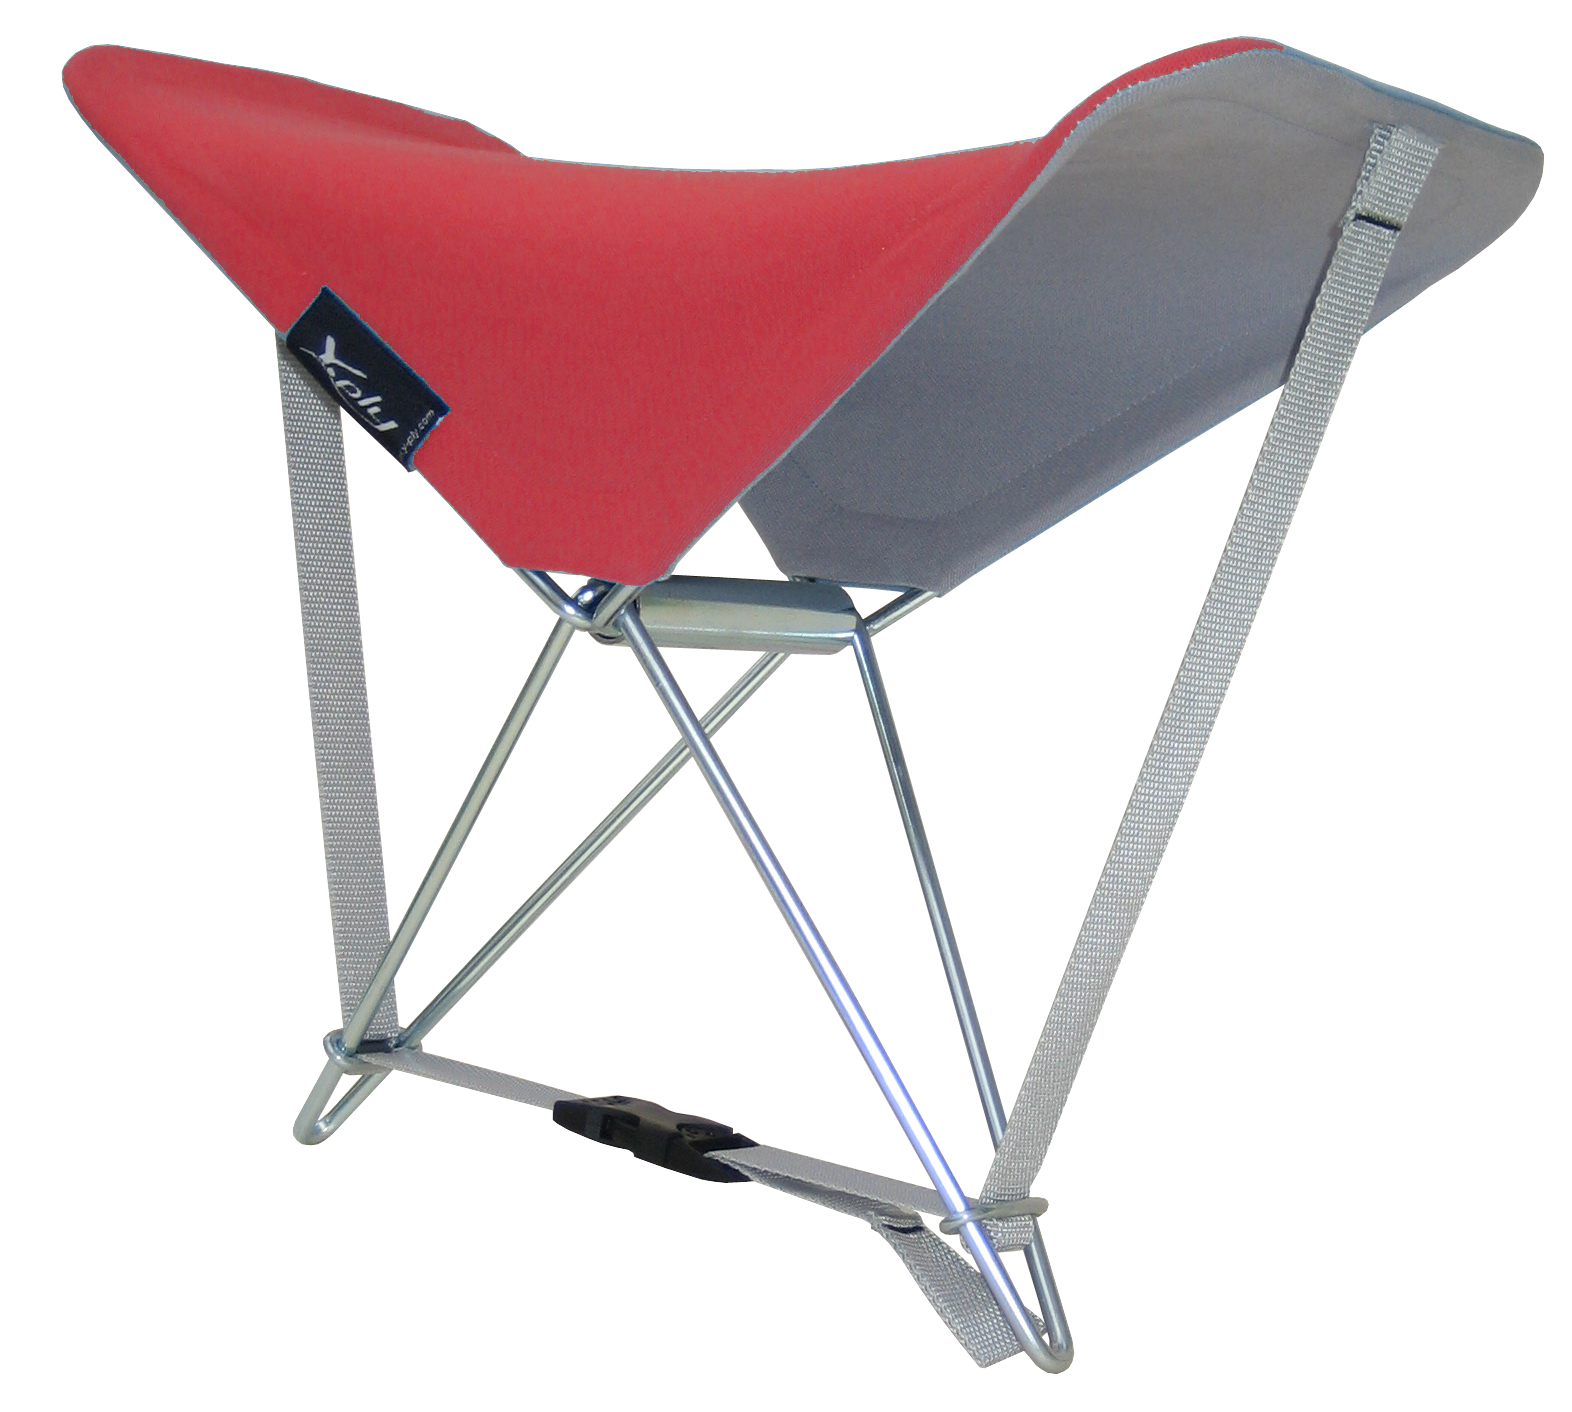 NEW BEACH, CAMPING, POOL, PICNIC CHAIR   DESIGNED IN FRANCE  